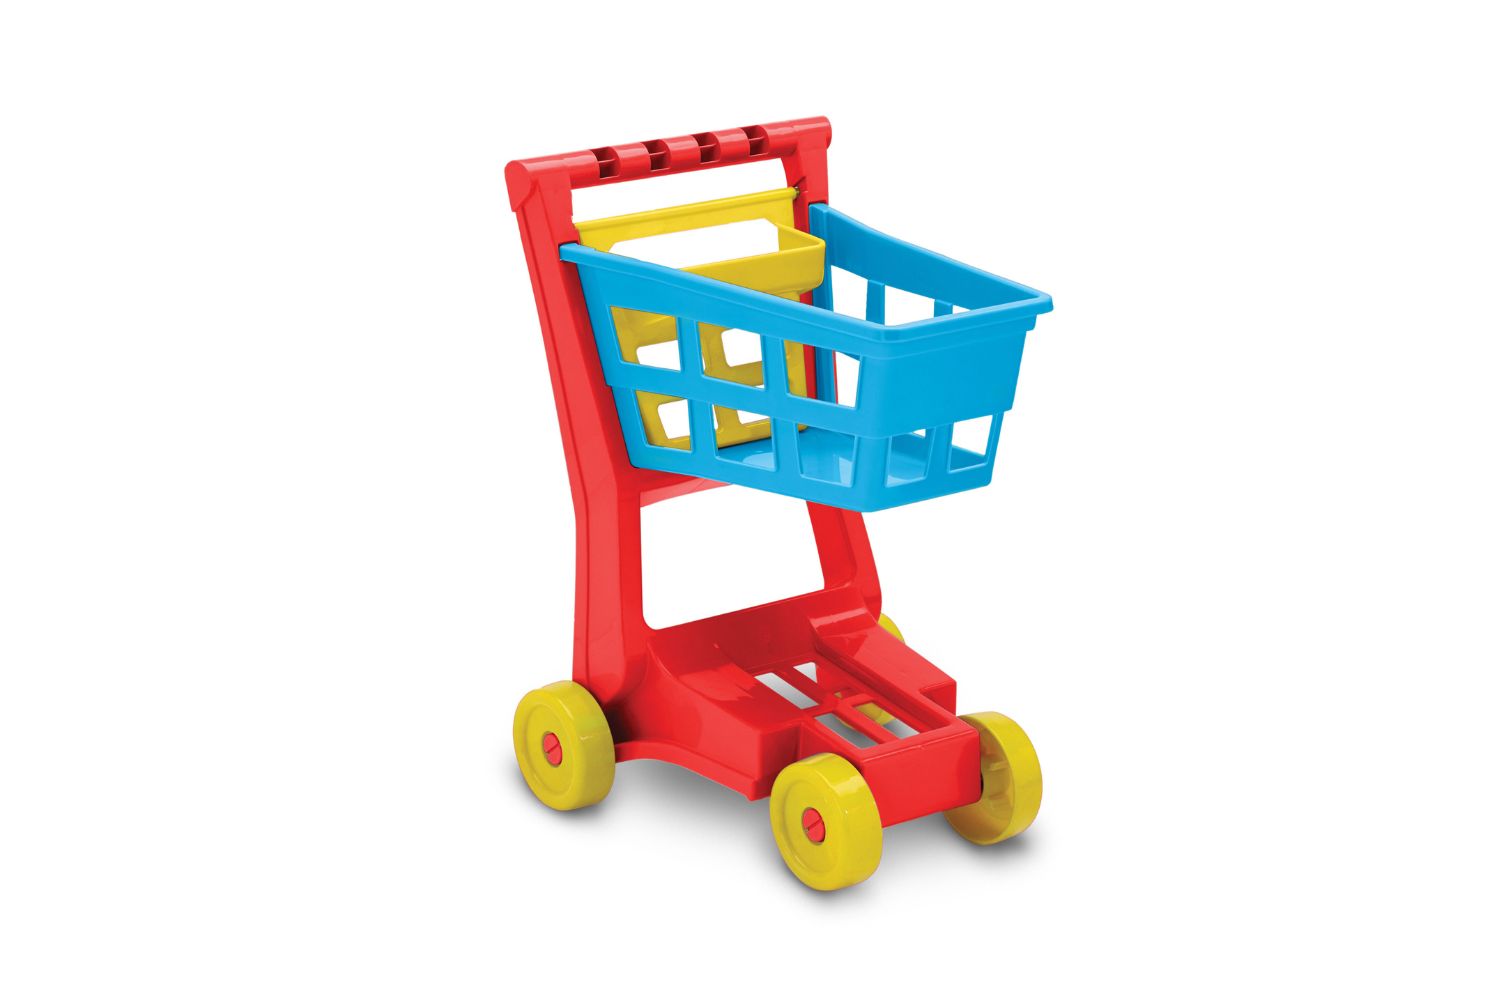 12-extraordinary-facts-about-target-toy-shopping-cart